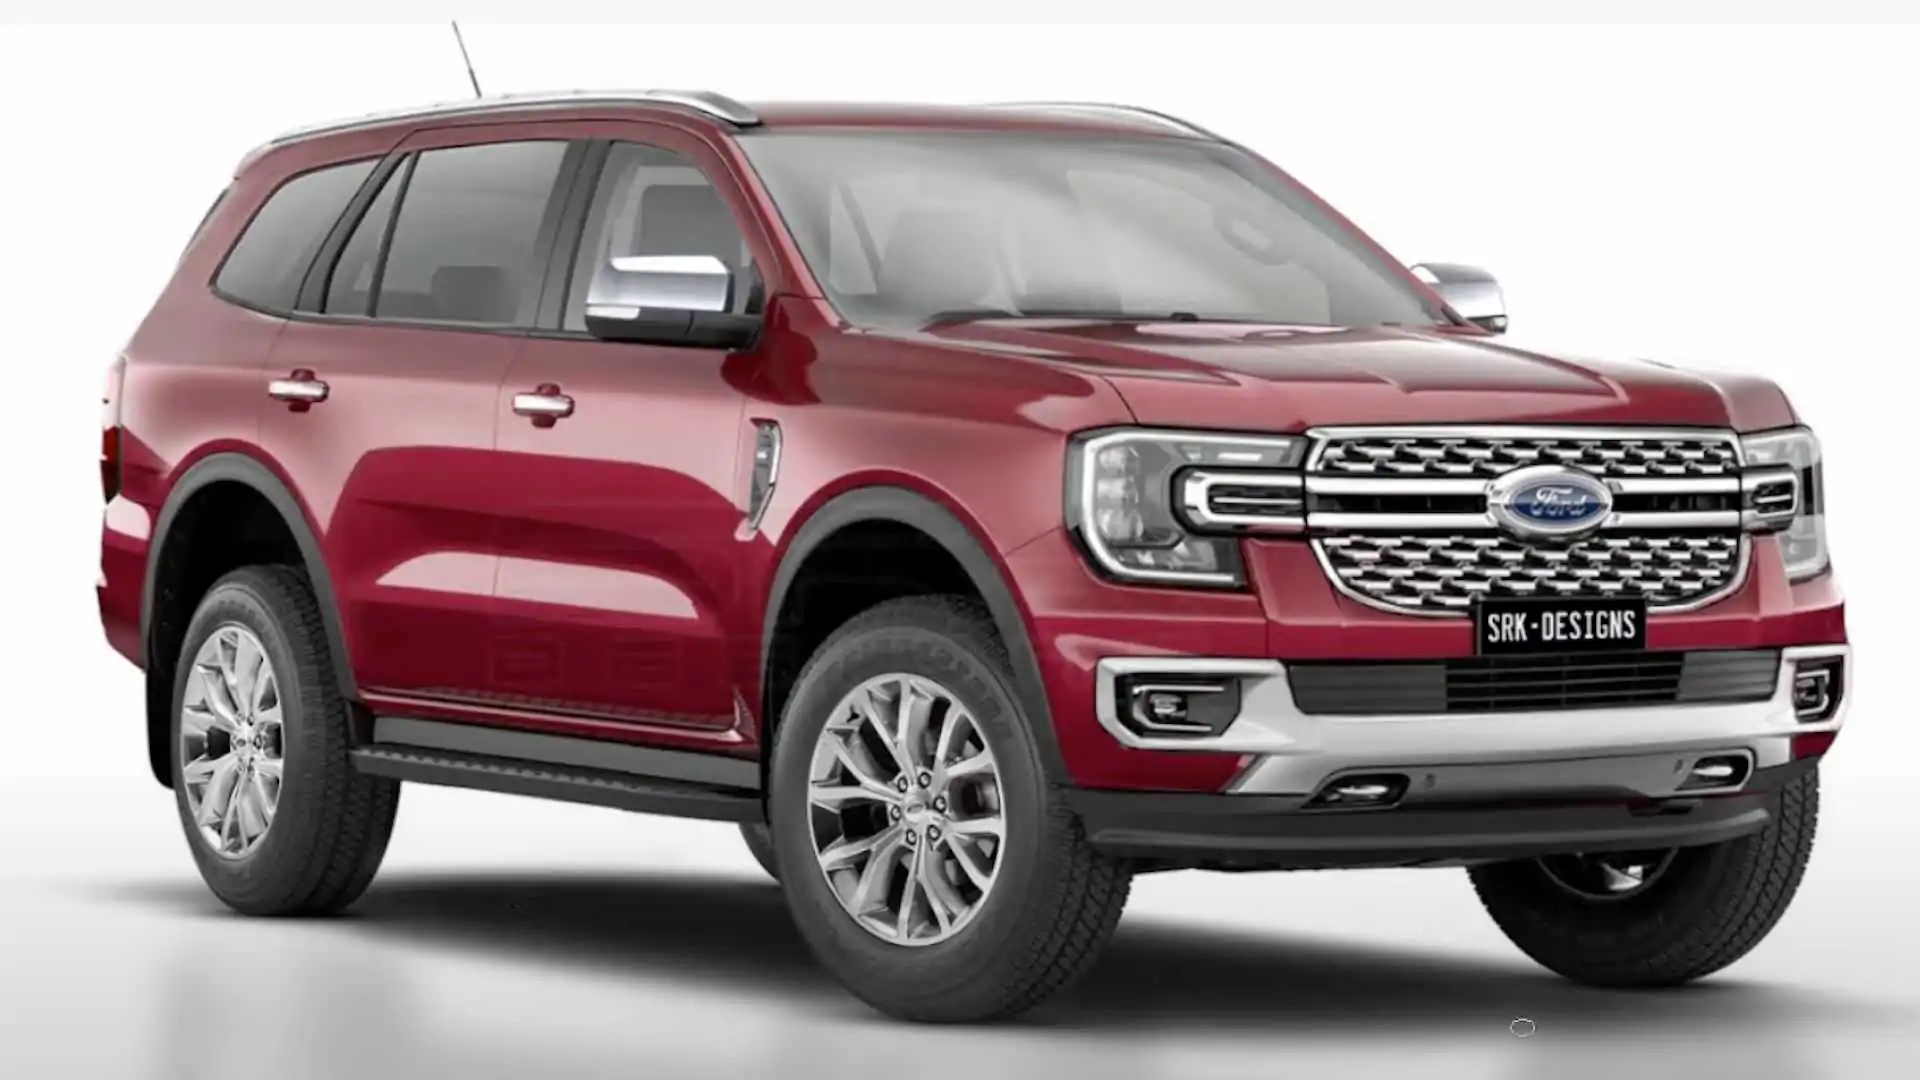 Phác họa thiết kế Ford Everest 2022 theo phong cách Ranger mới 2022-ford-everest-unofficial-rendering-by-srk-designs.webp